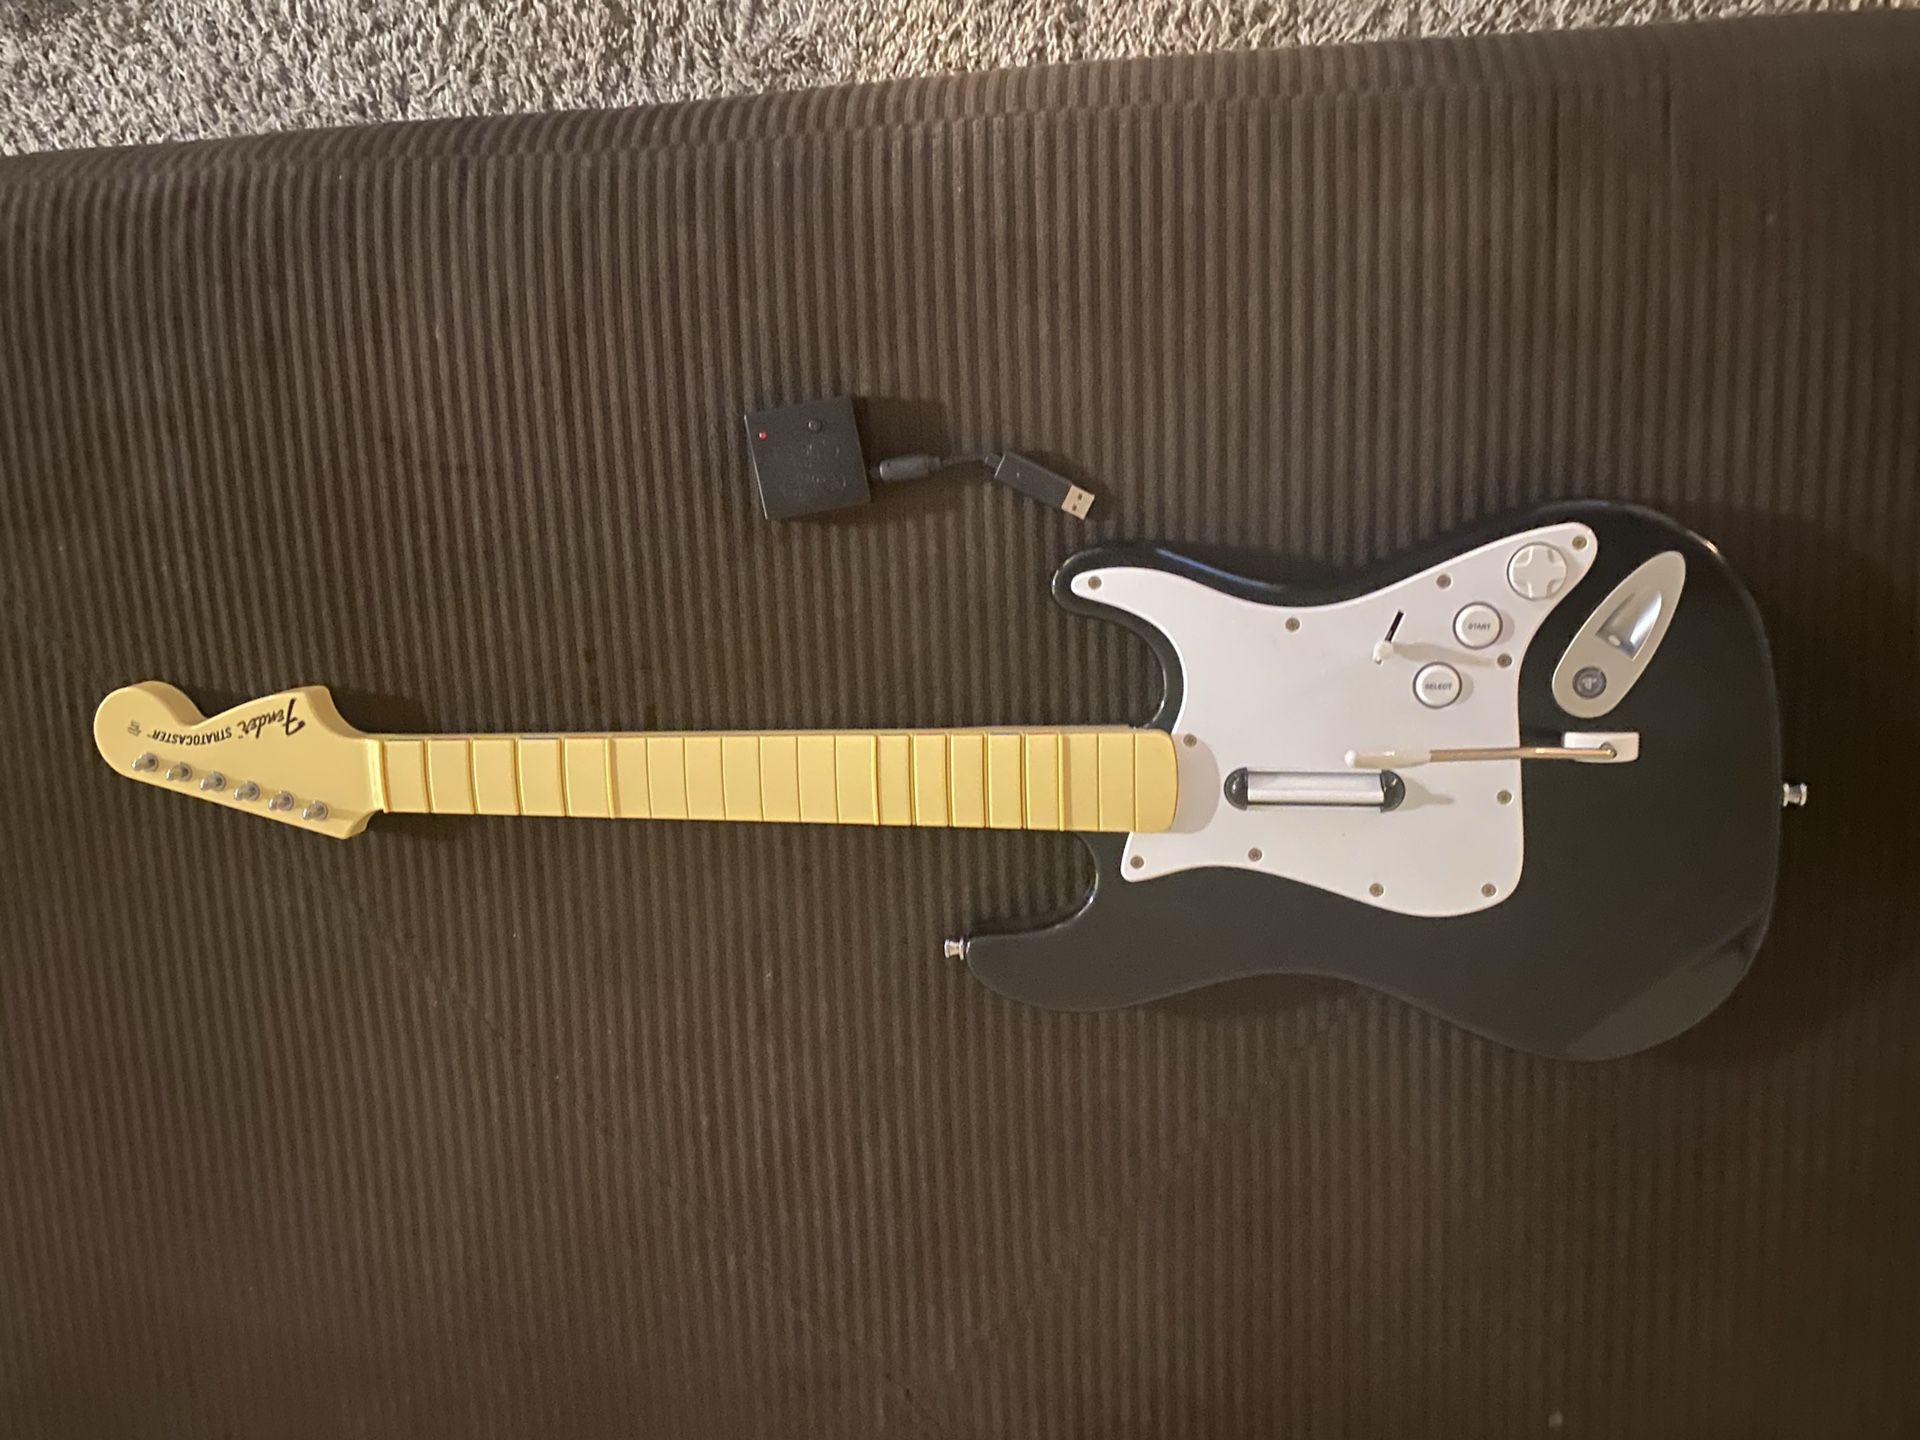 Rockband guitar w/dongle (PS3) and Rockband and compatible Guitar hero games.